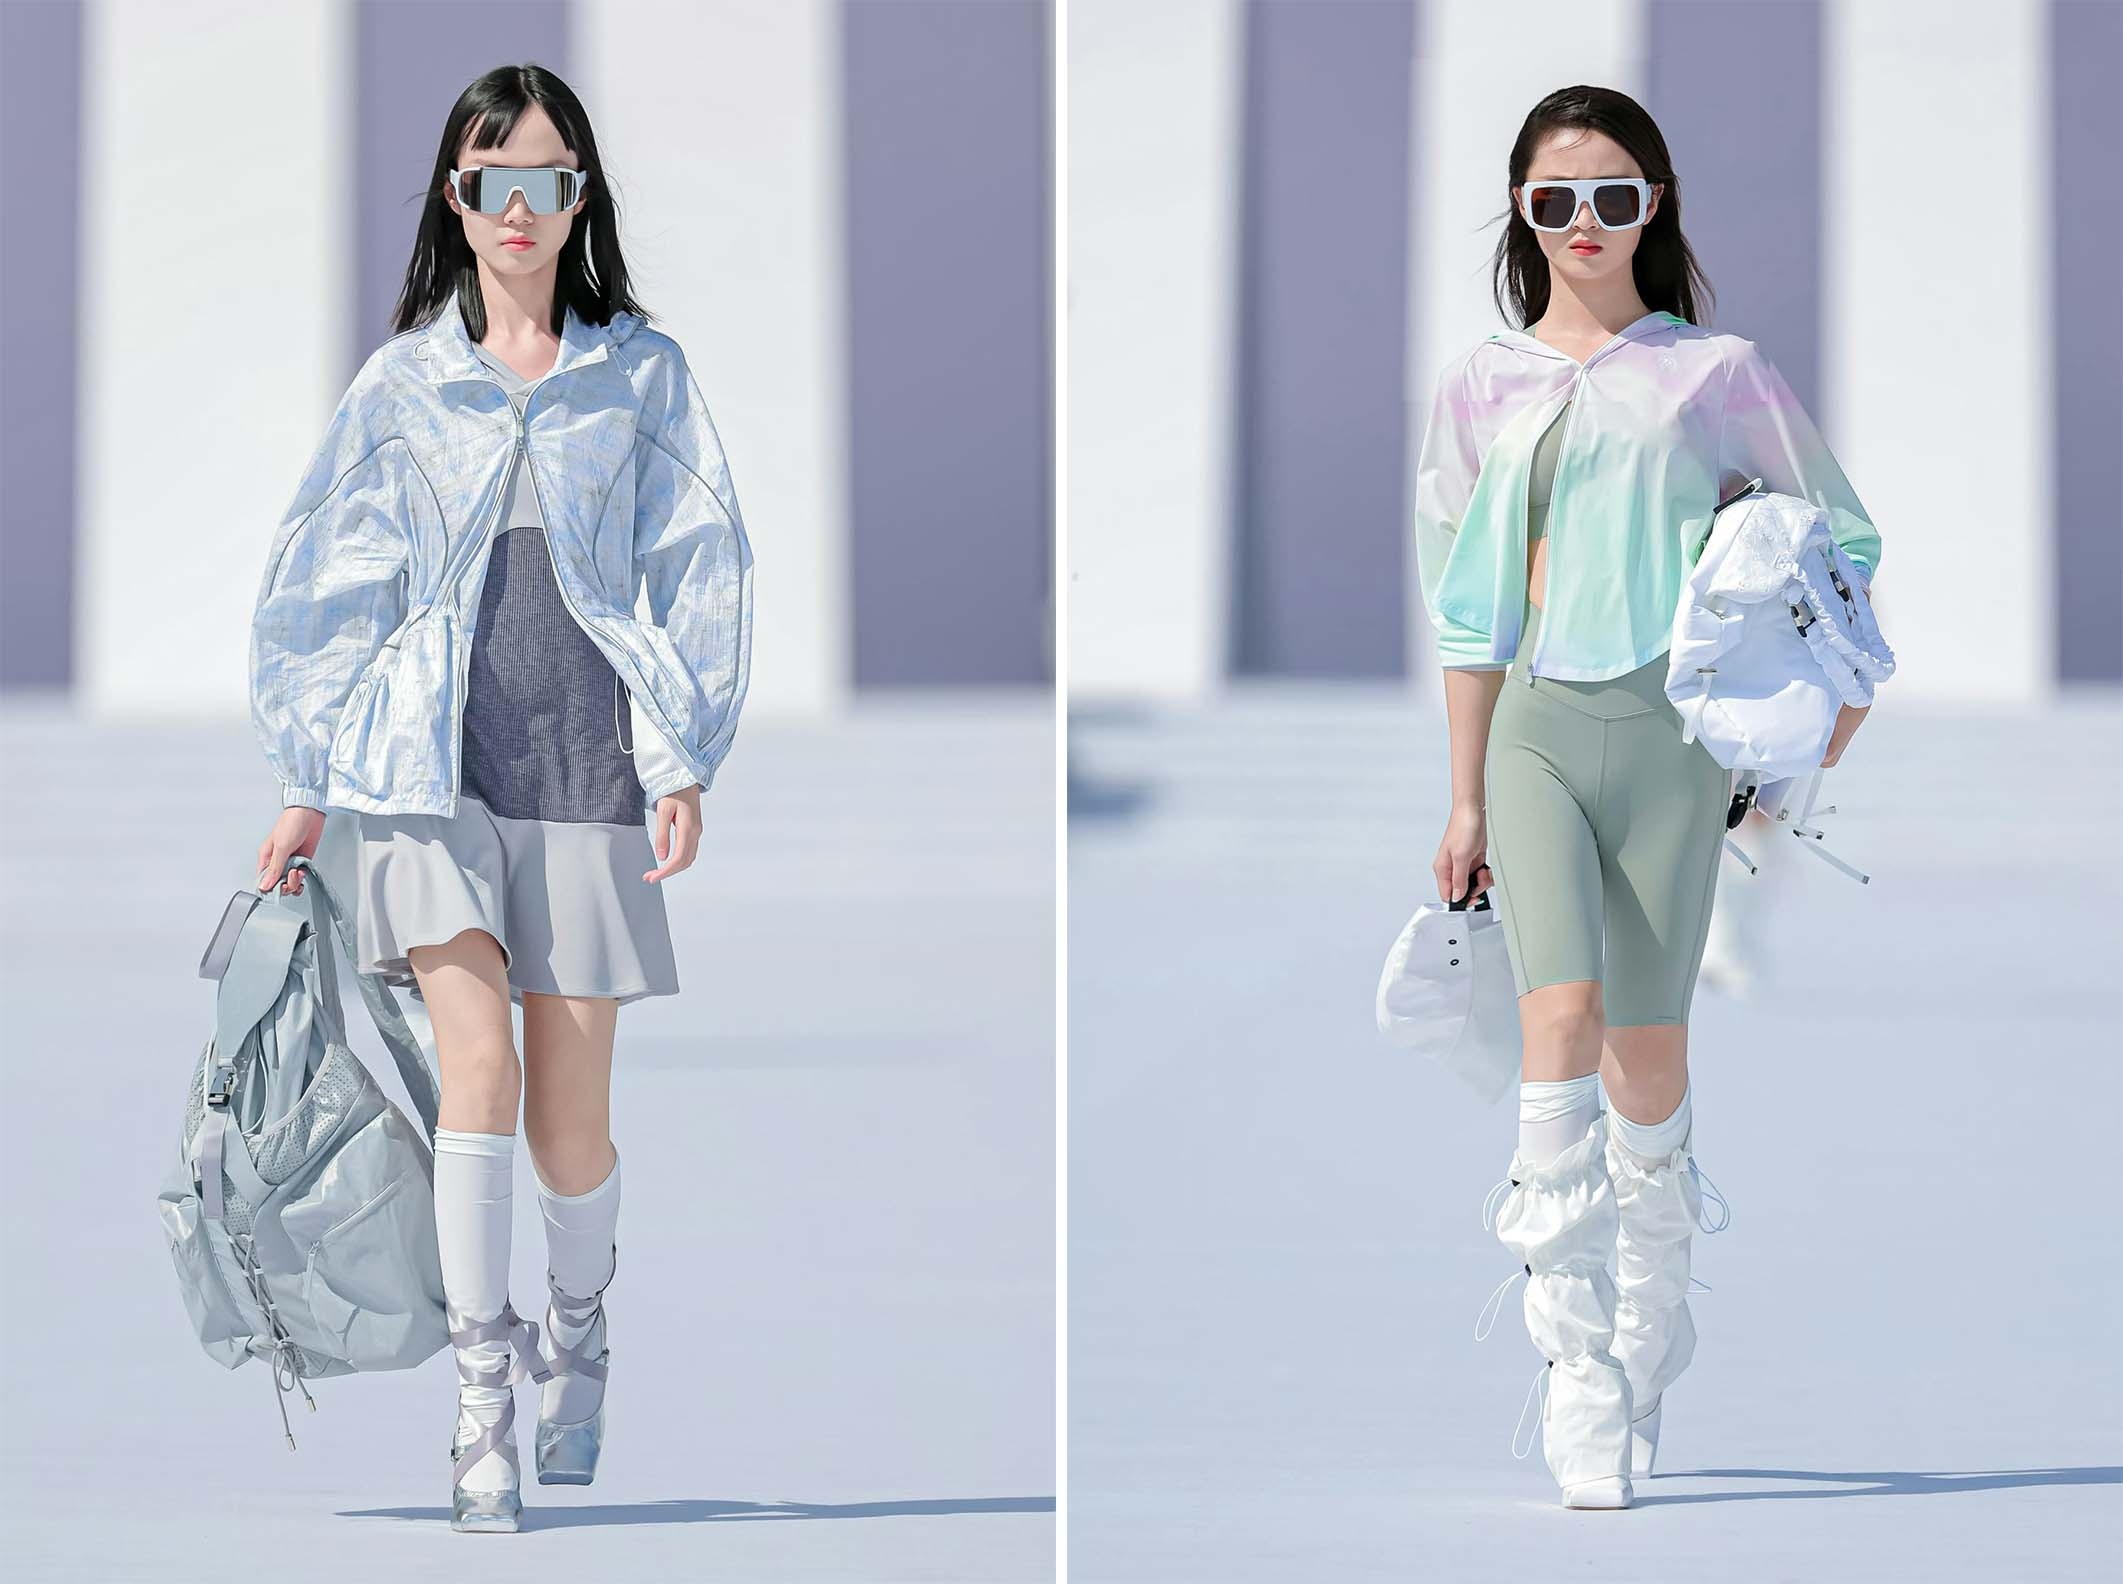 Bosideng held its first sun protective clothing show on April 18 at the Beijing International Film Festival. Image: Bosideng